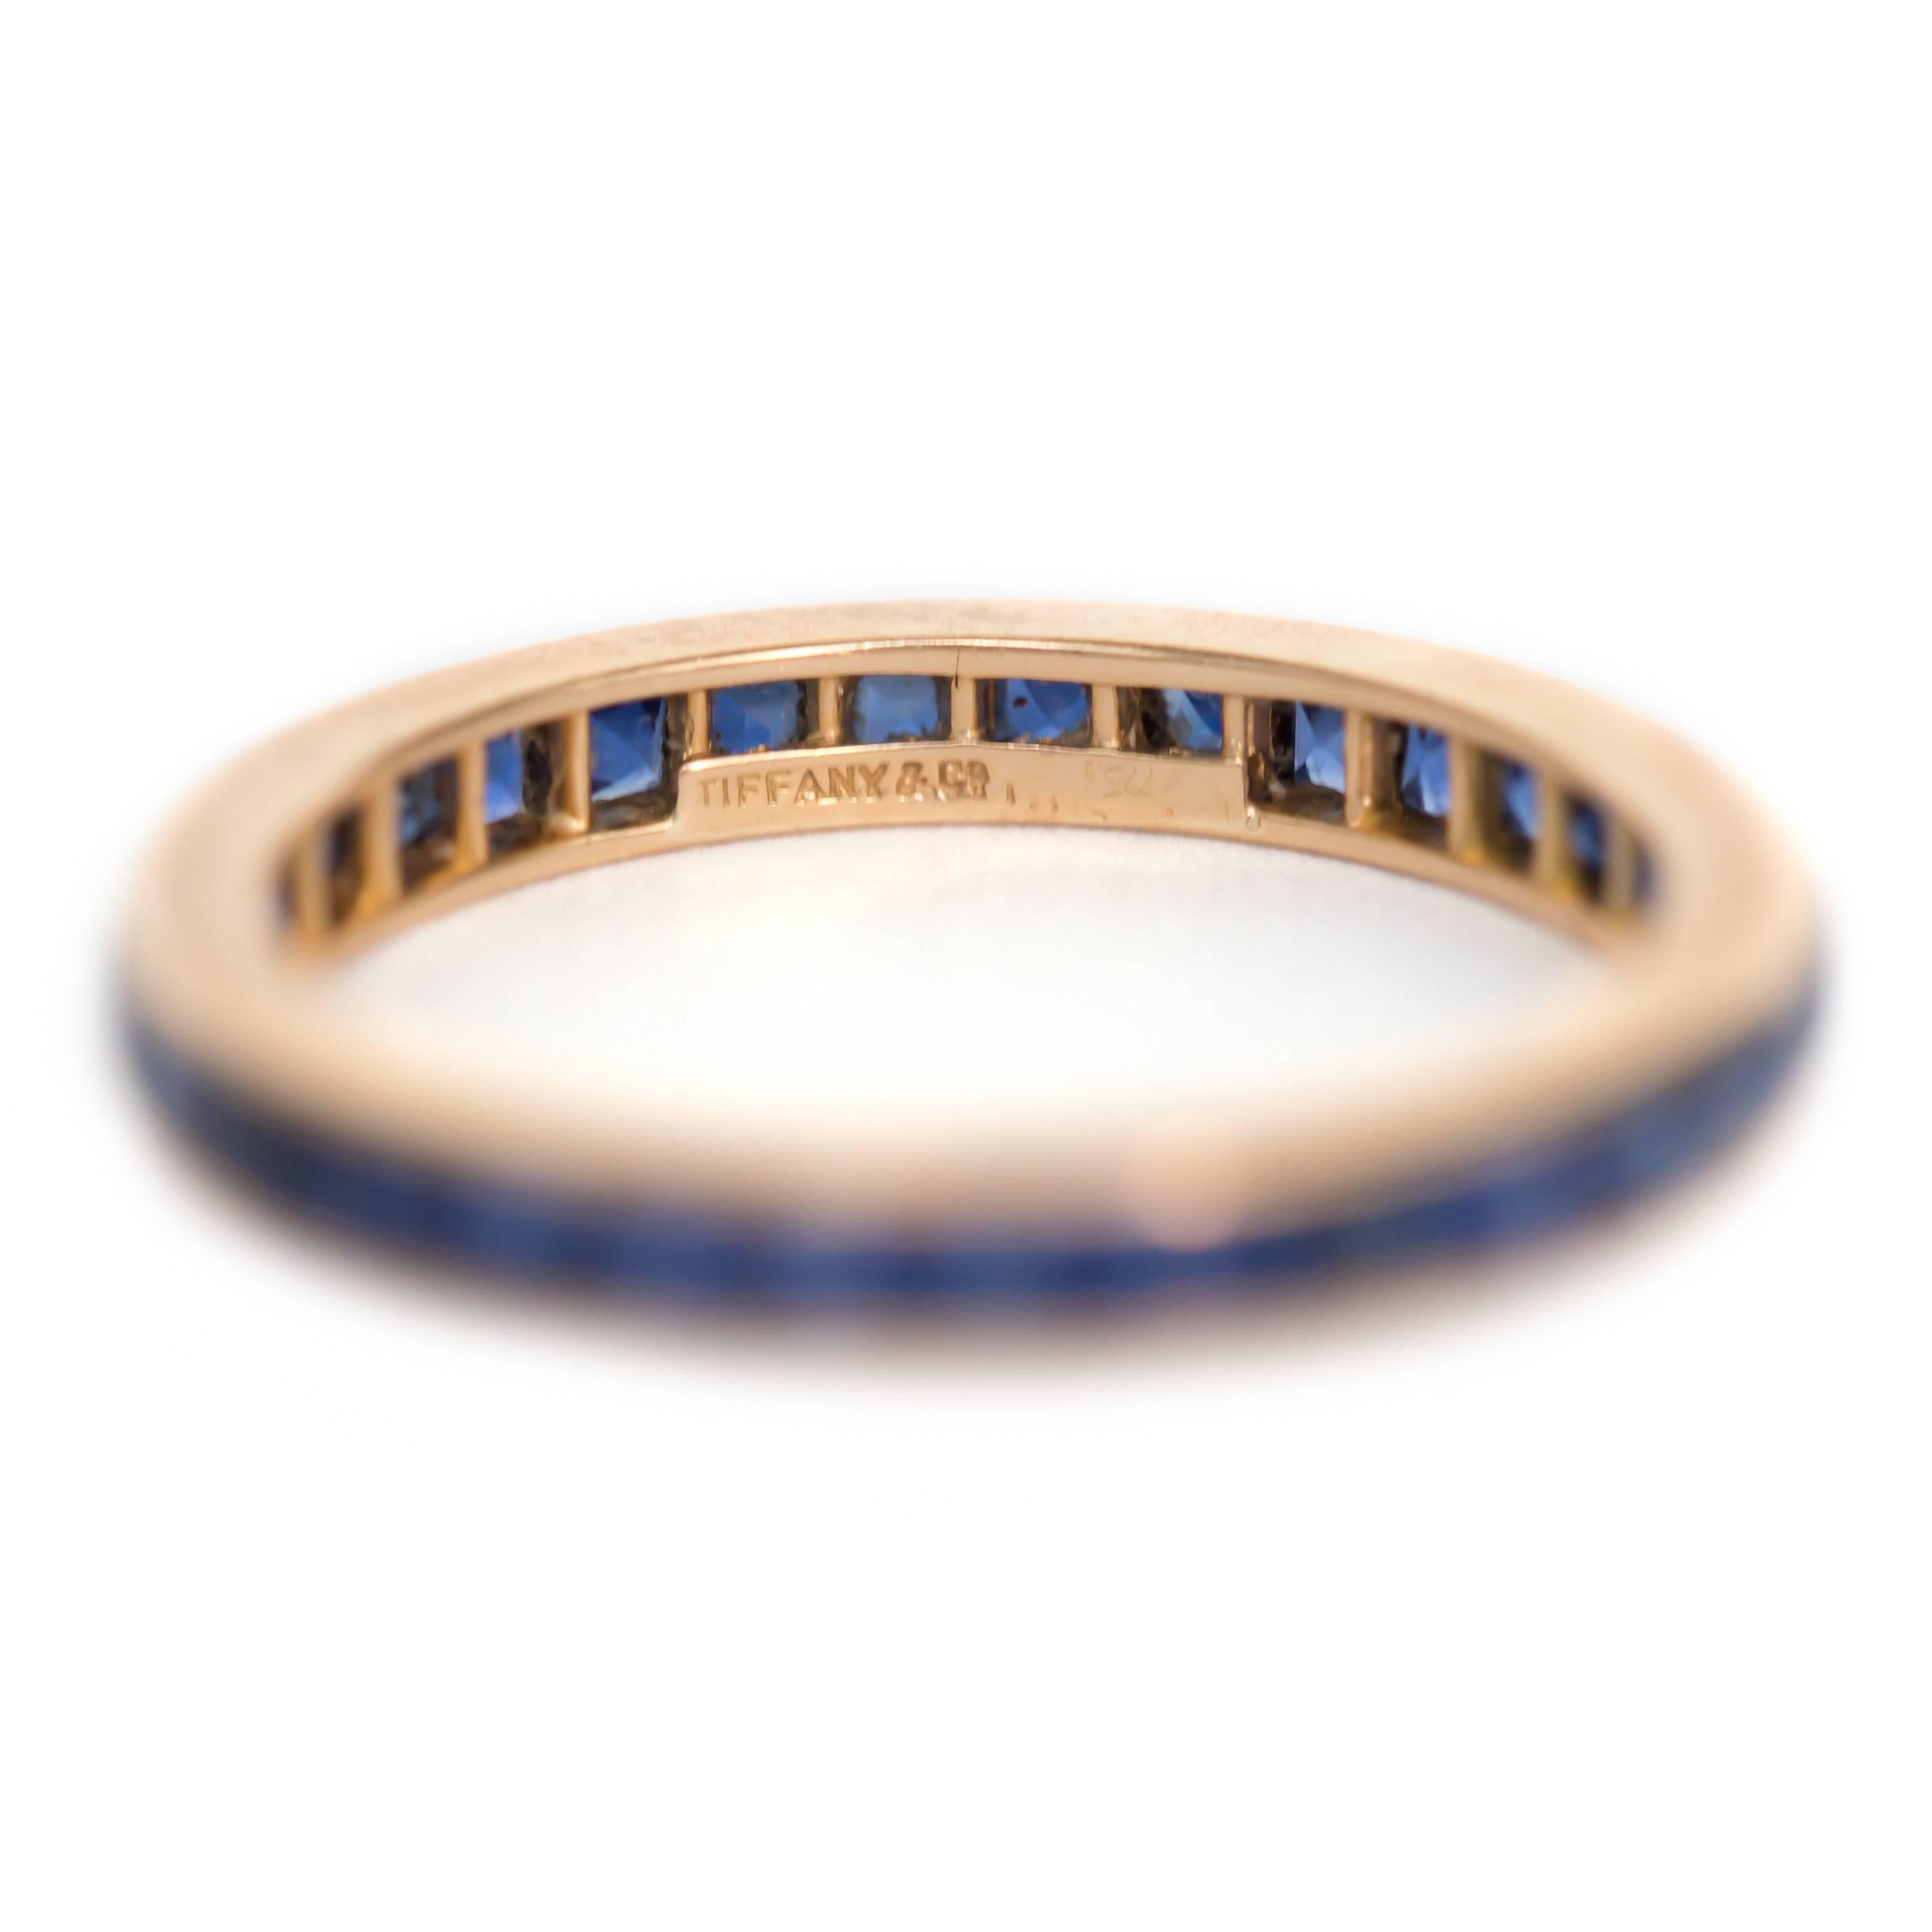 Item Details: 
Ring Size: 7
Metal Type: 18 Karat Yellow Gold
Weight: 2.0 grams

Color Stone Details: 
Type: Natural Sapphire
Shape: Square Step Cut
Carat Weight: 2.00 ct, total weight.
Color: Deep Blue

Tiffany & Co.

Finger to Top of Stone